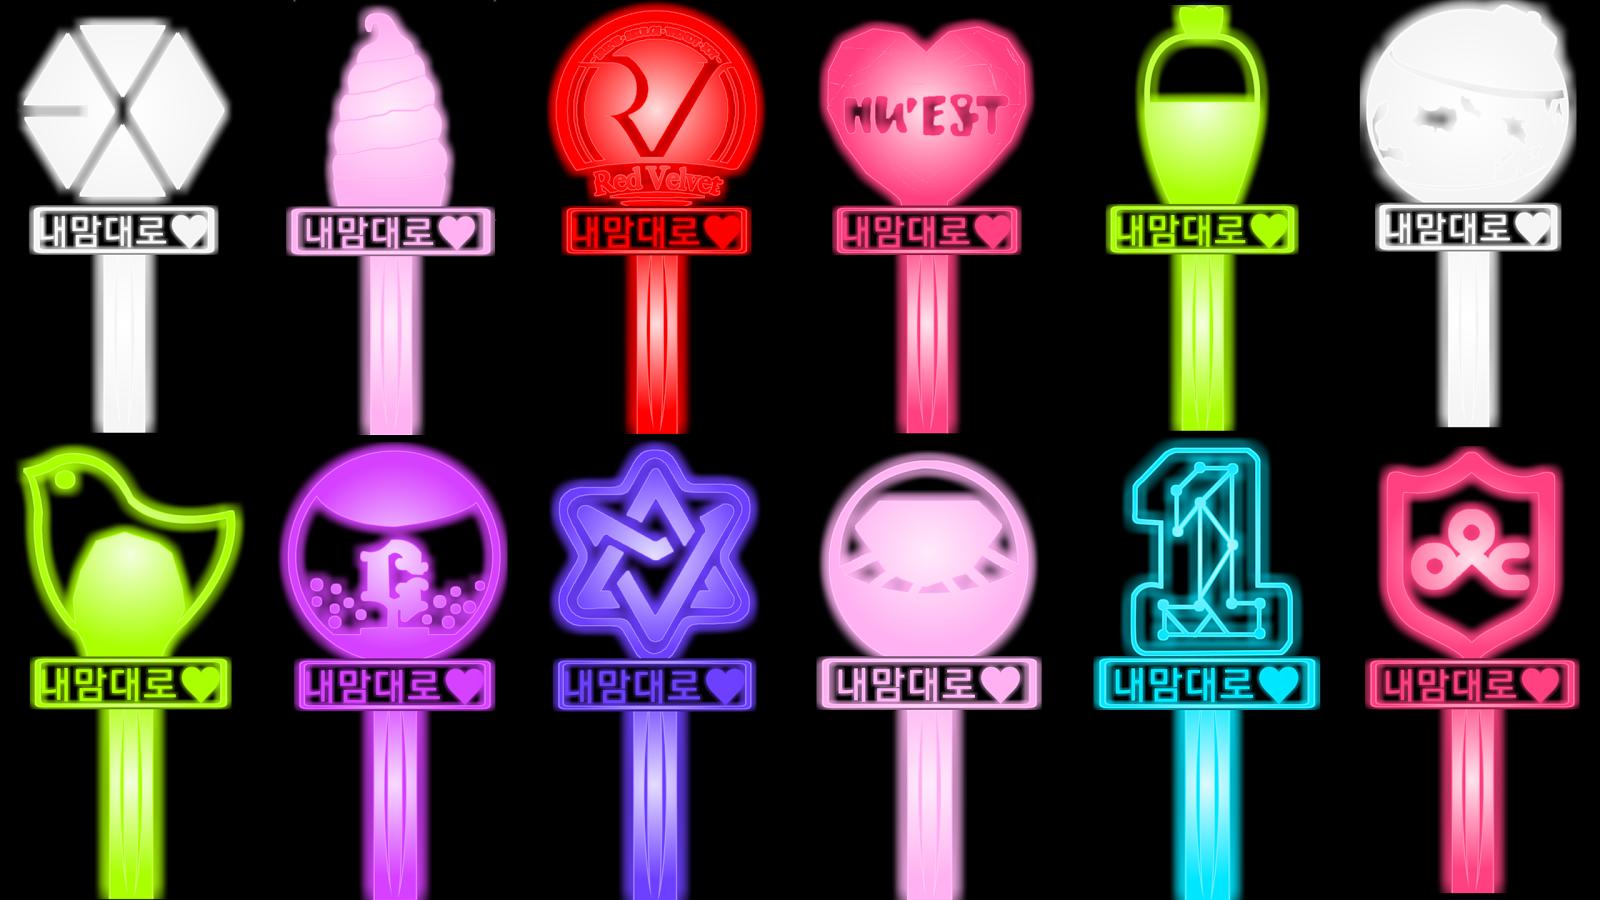 Kpop Idol Lightstick Led Signboard Concert Party For Android Apk Download